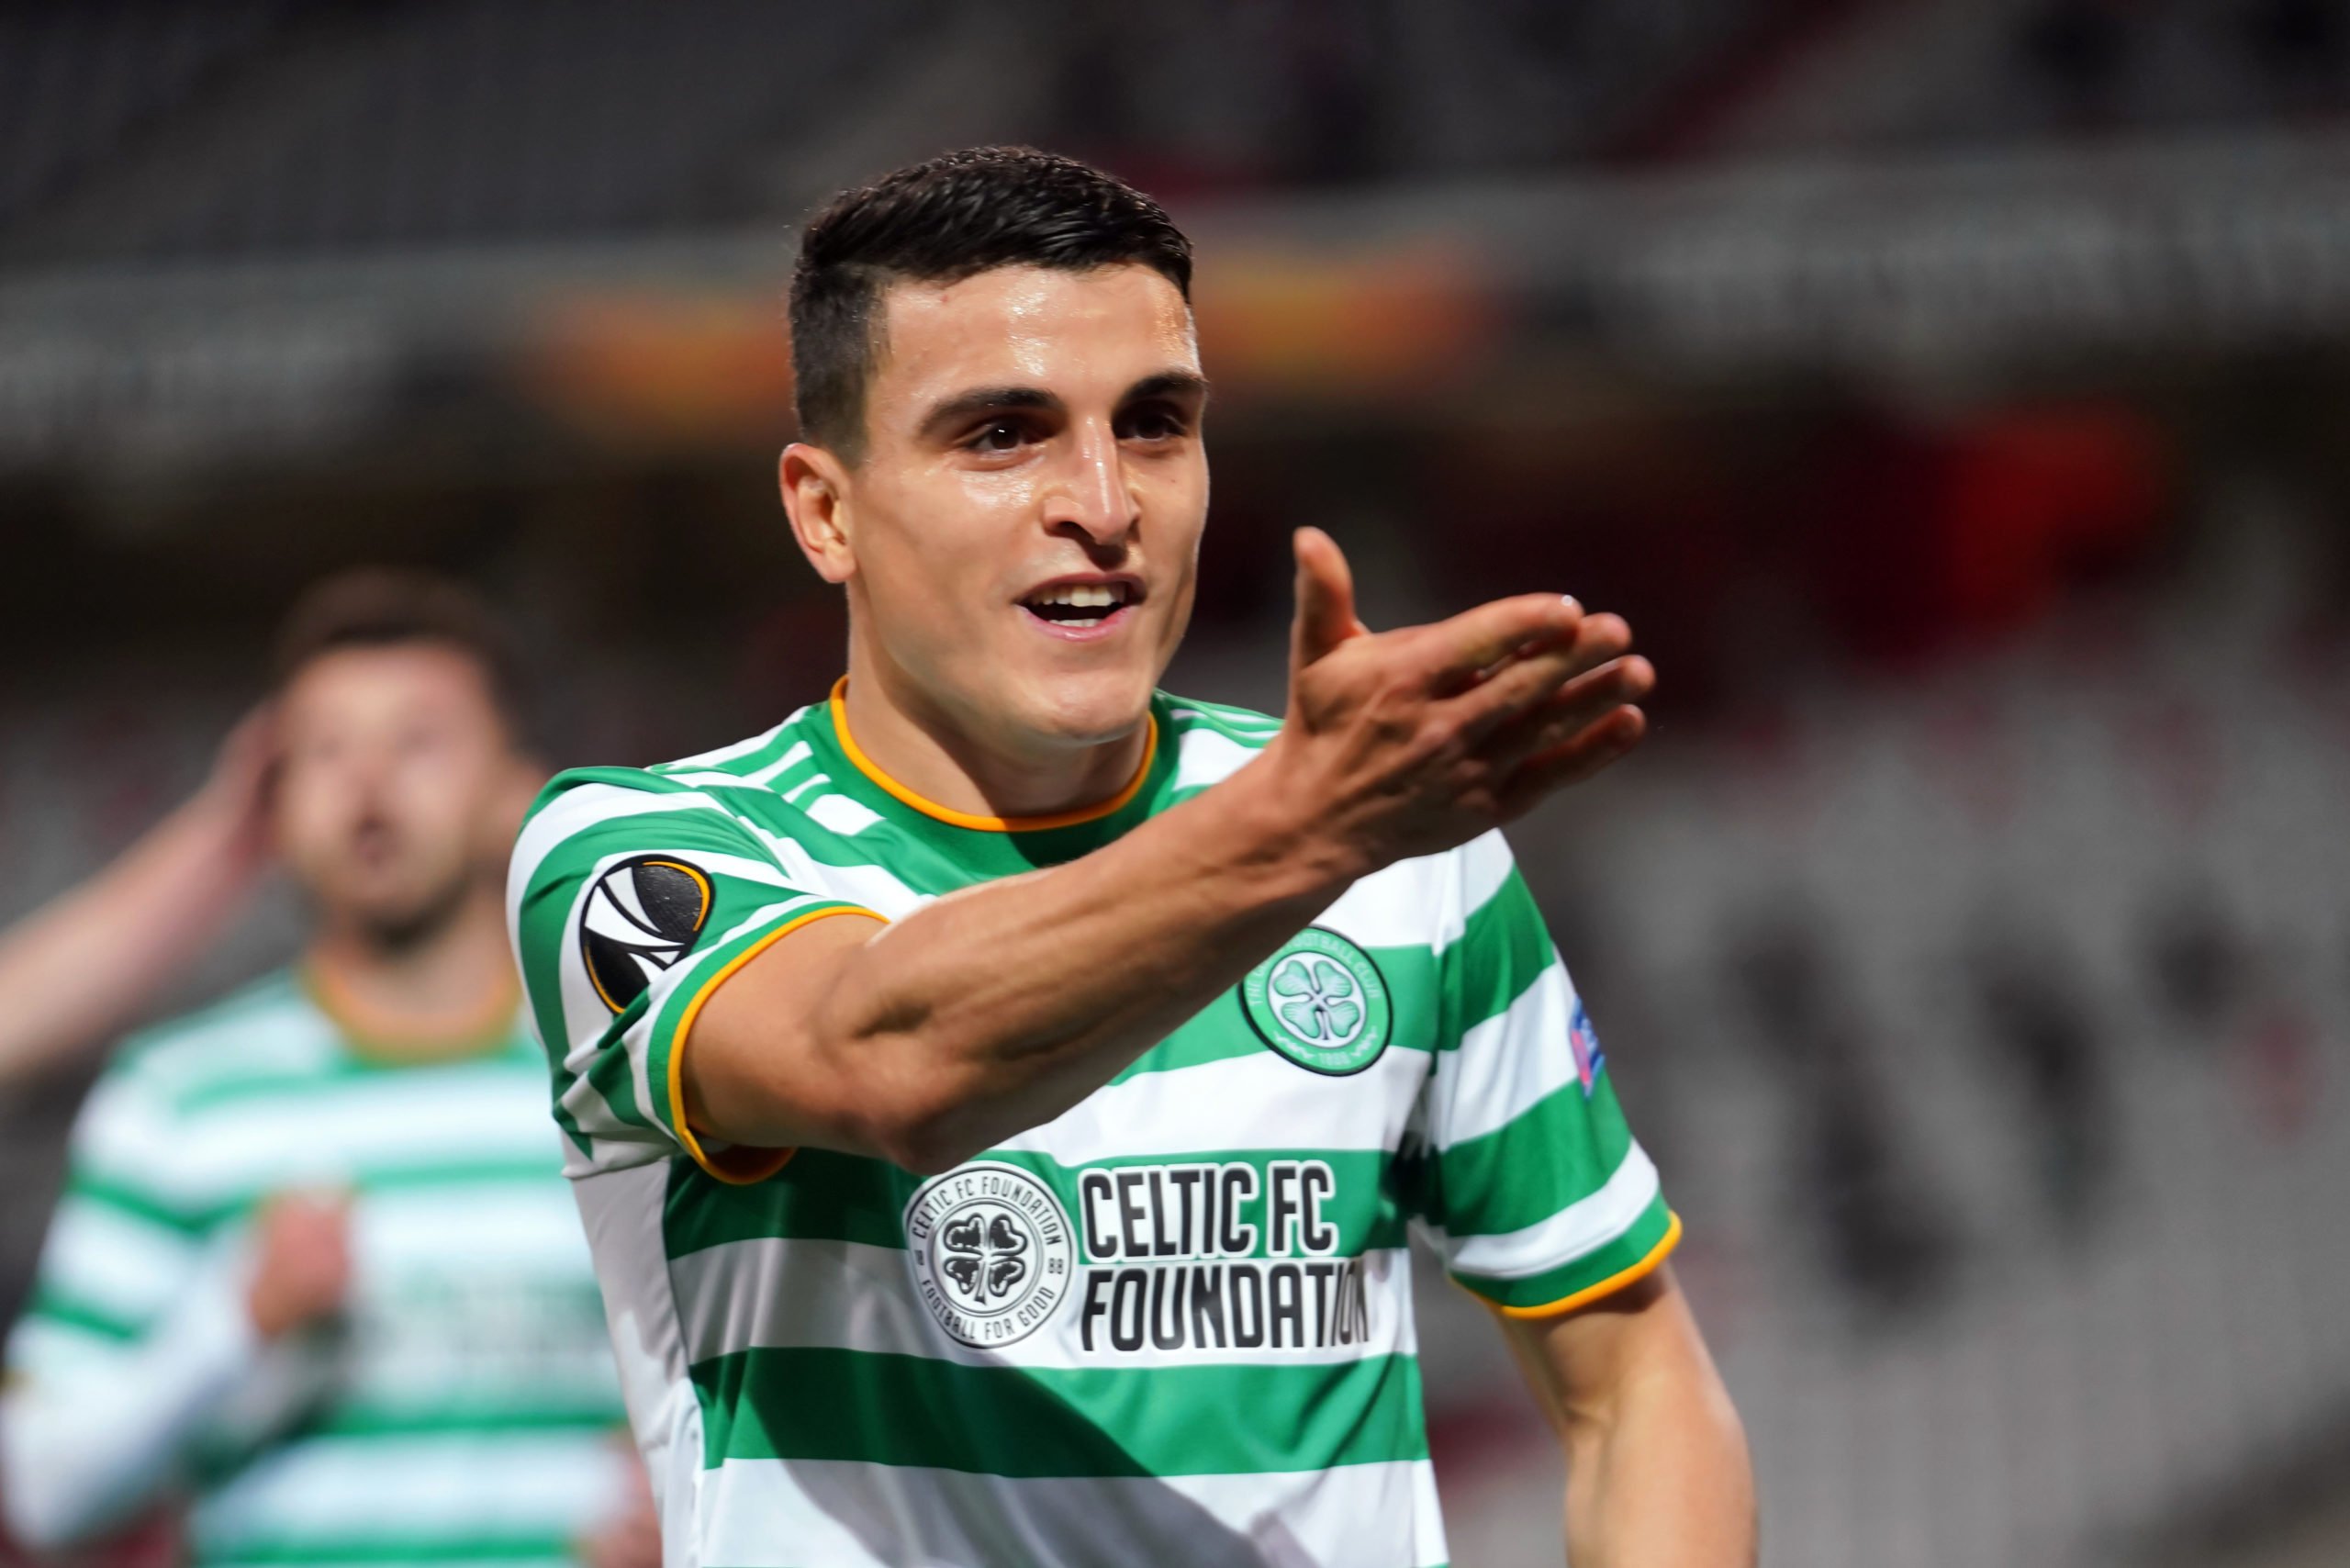 Celtic hero Moi Elyounoussi vowed to "destroy" rivals in 2019; now's the time to do it